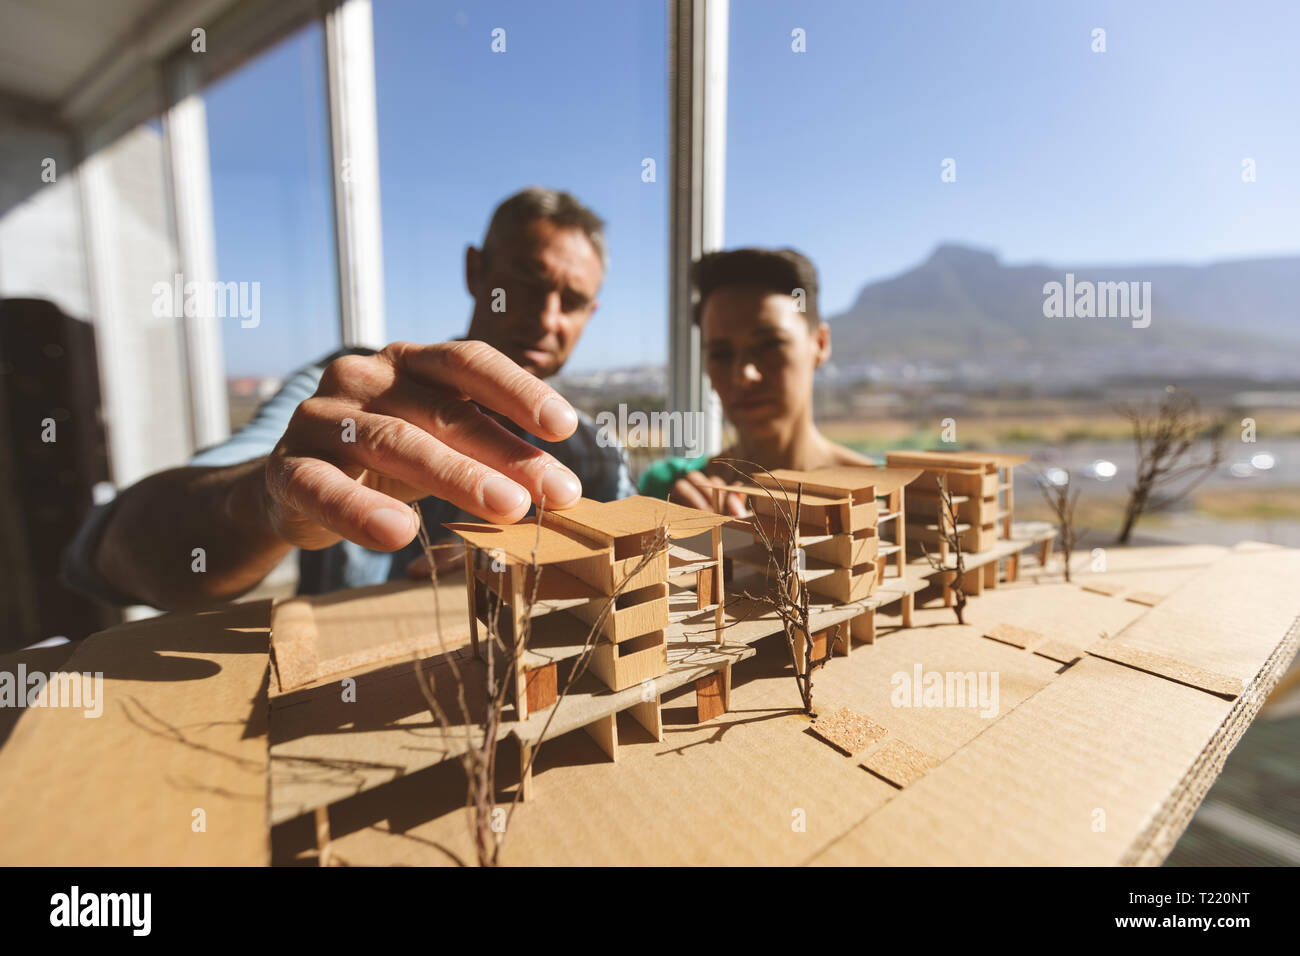 Architects discussing over architectural model Stock Photo